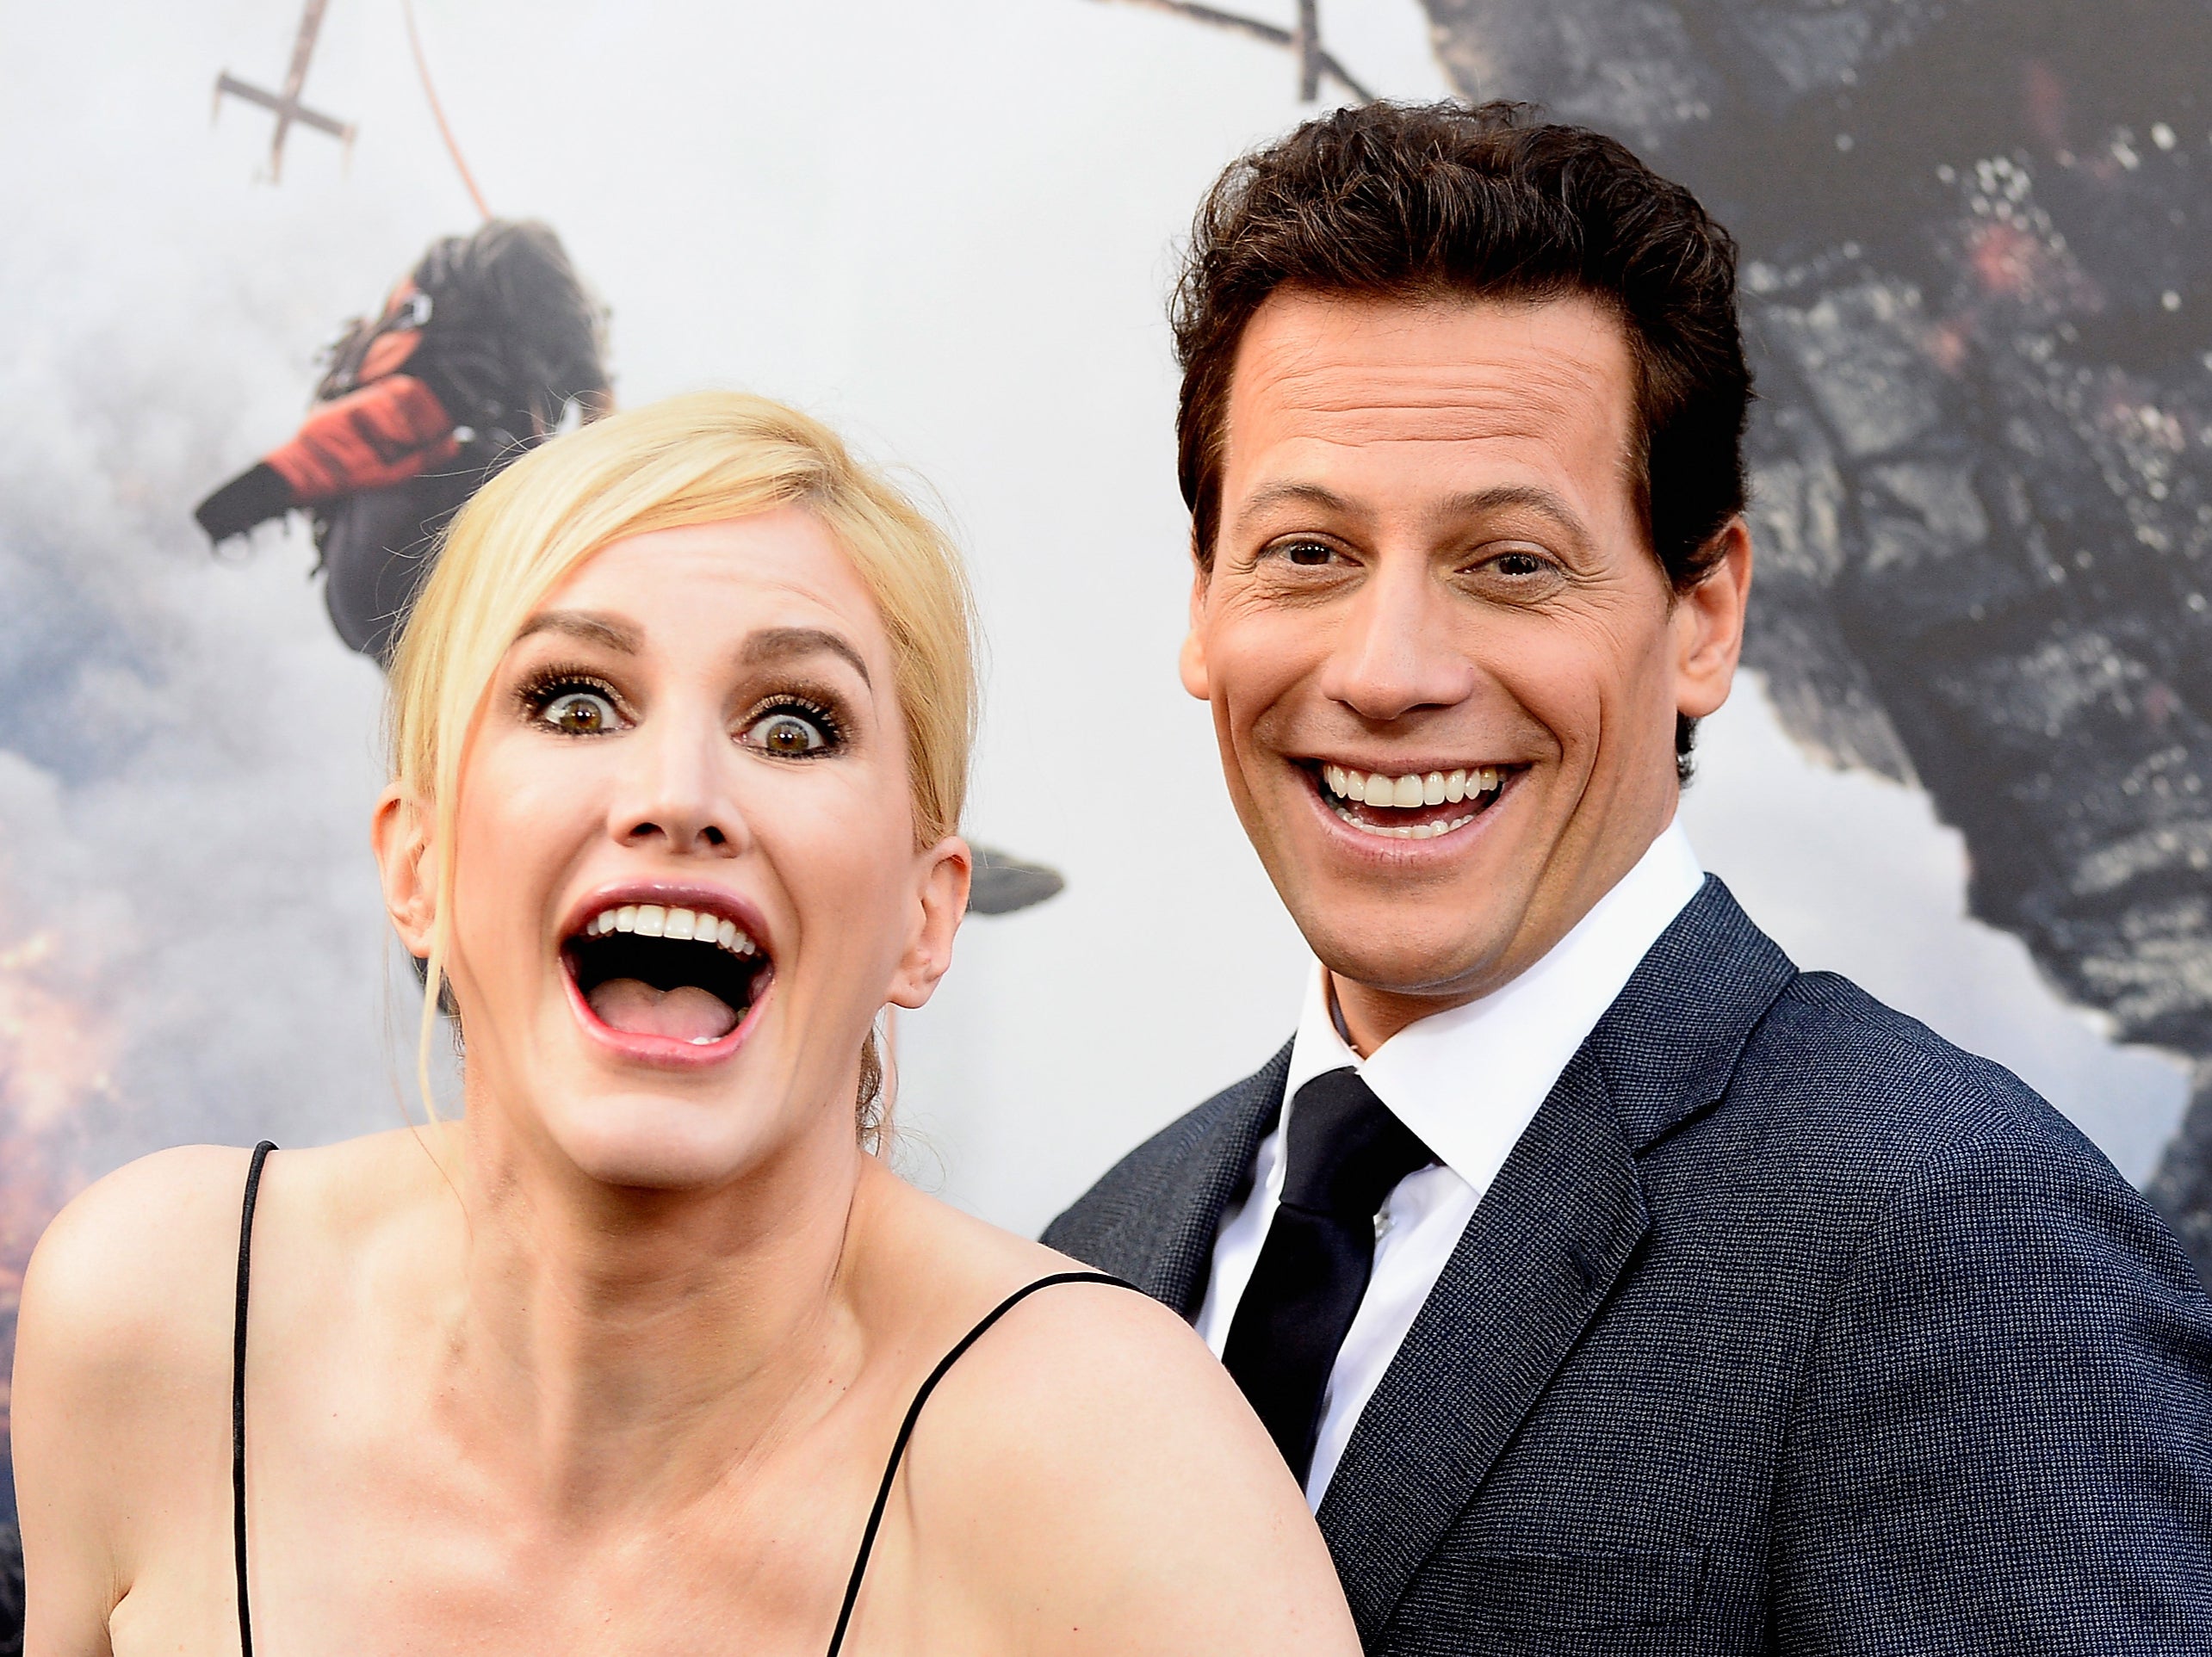 Alice Evans and Ioan Gruffudd pictured at the premiere of ‘San Andreas’ in 2015